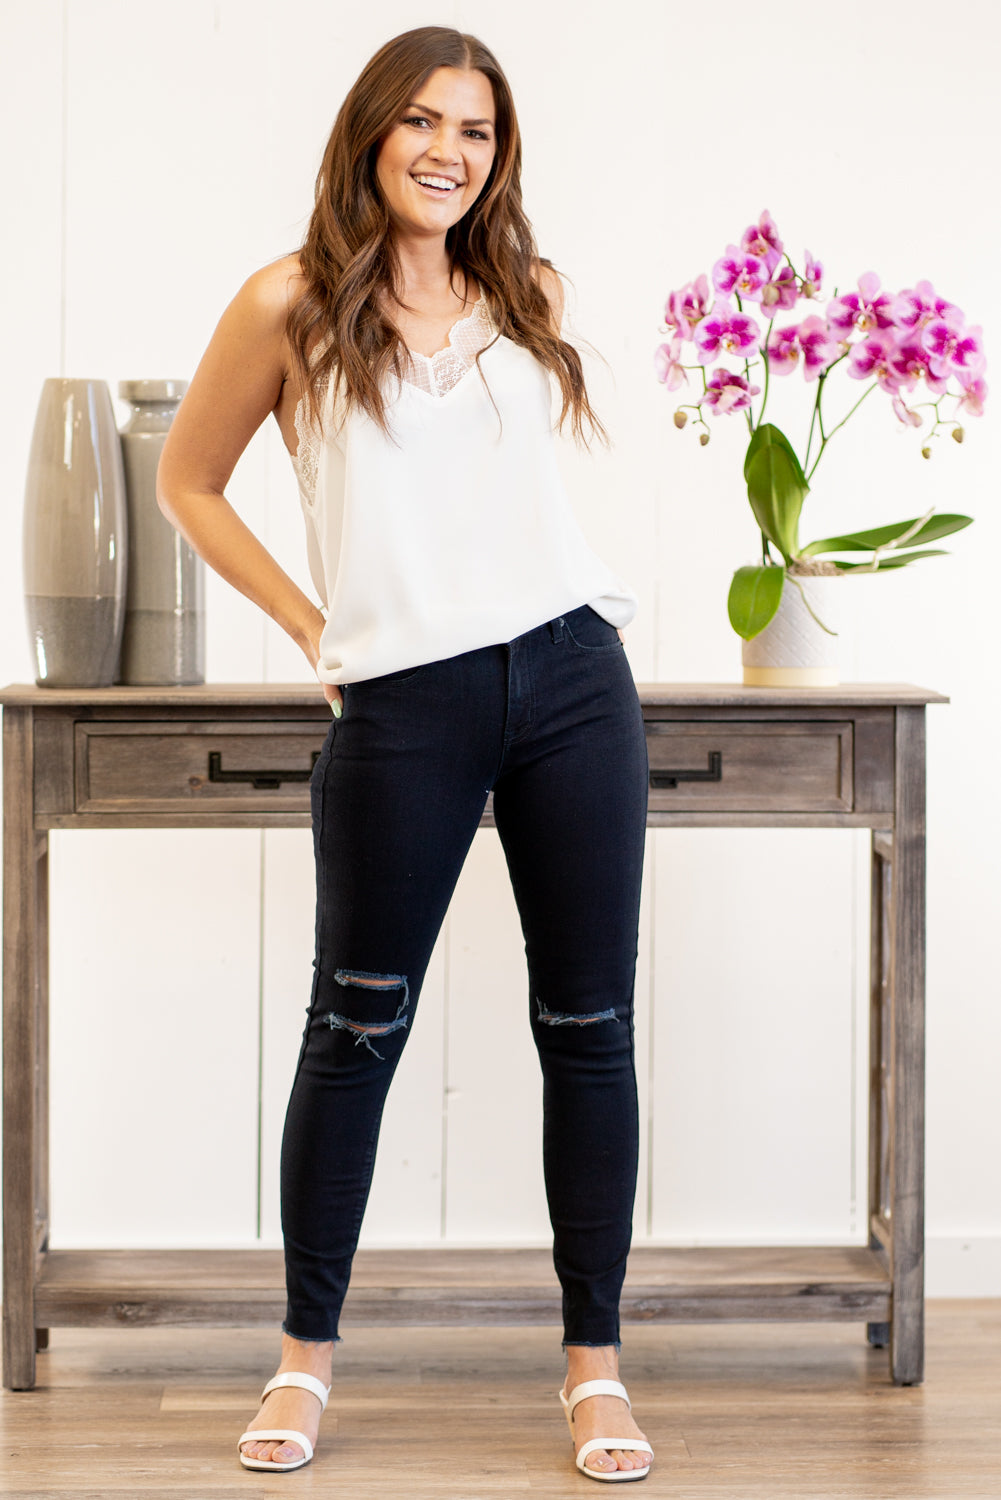 Just USA Jeans  Color: Dark Blue Distressed Legs & Mini Frayed Hem Cut: Skinny, 27" Inseam Mid Rise, 9" Front Rise   Stitching: Classic 51% RAYON, 26% Rayon, 12% Polyester, 1% Lycra Fly: Zipper Style #: JP033-DK Contact us for any additional measurements or sizing.  Kristin wears a size small top, a 3 in jeans, and a 7 in shoes. She is wearing a size 4 in these jeans.